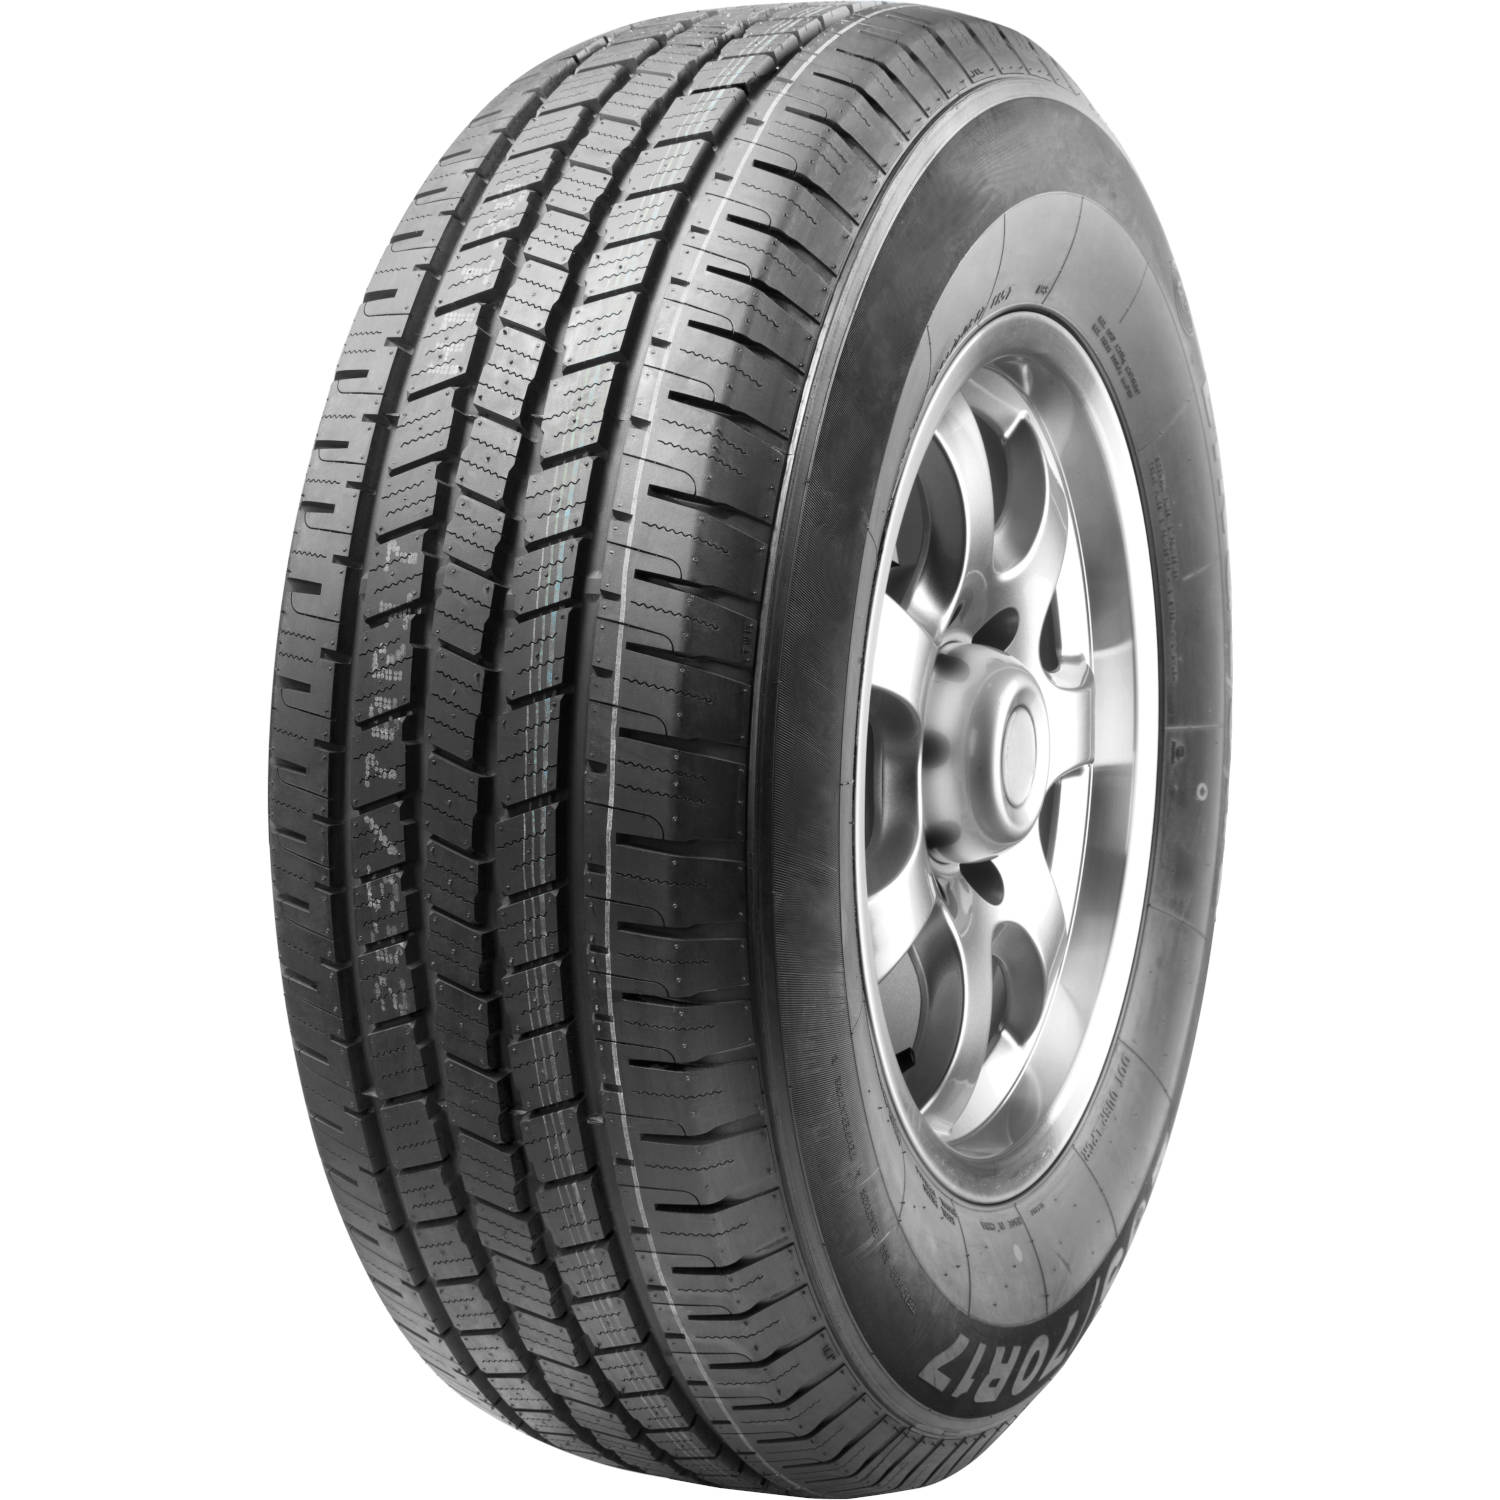 ROAD ONE CAVALRY H/T 235/65R17 (29.1X9.3R 17) Tires